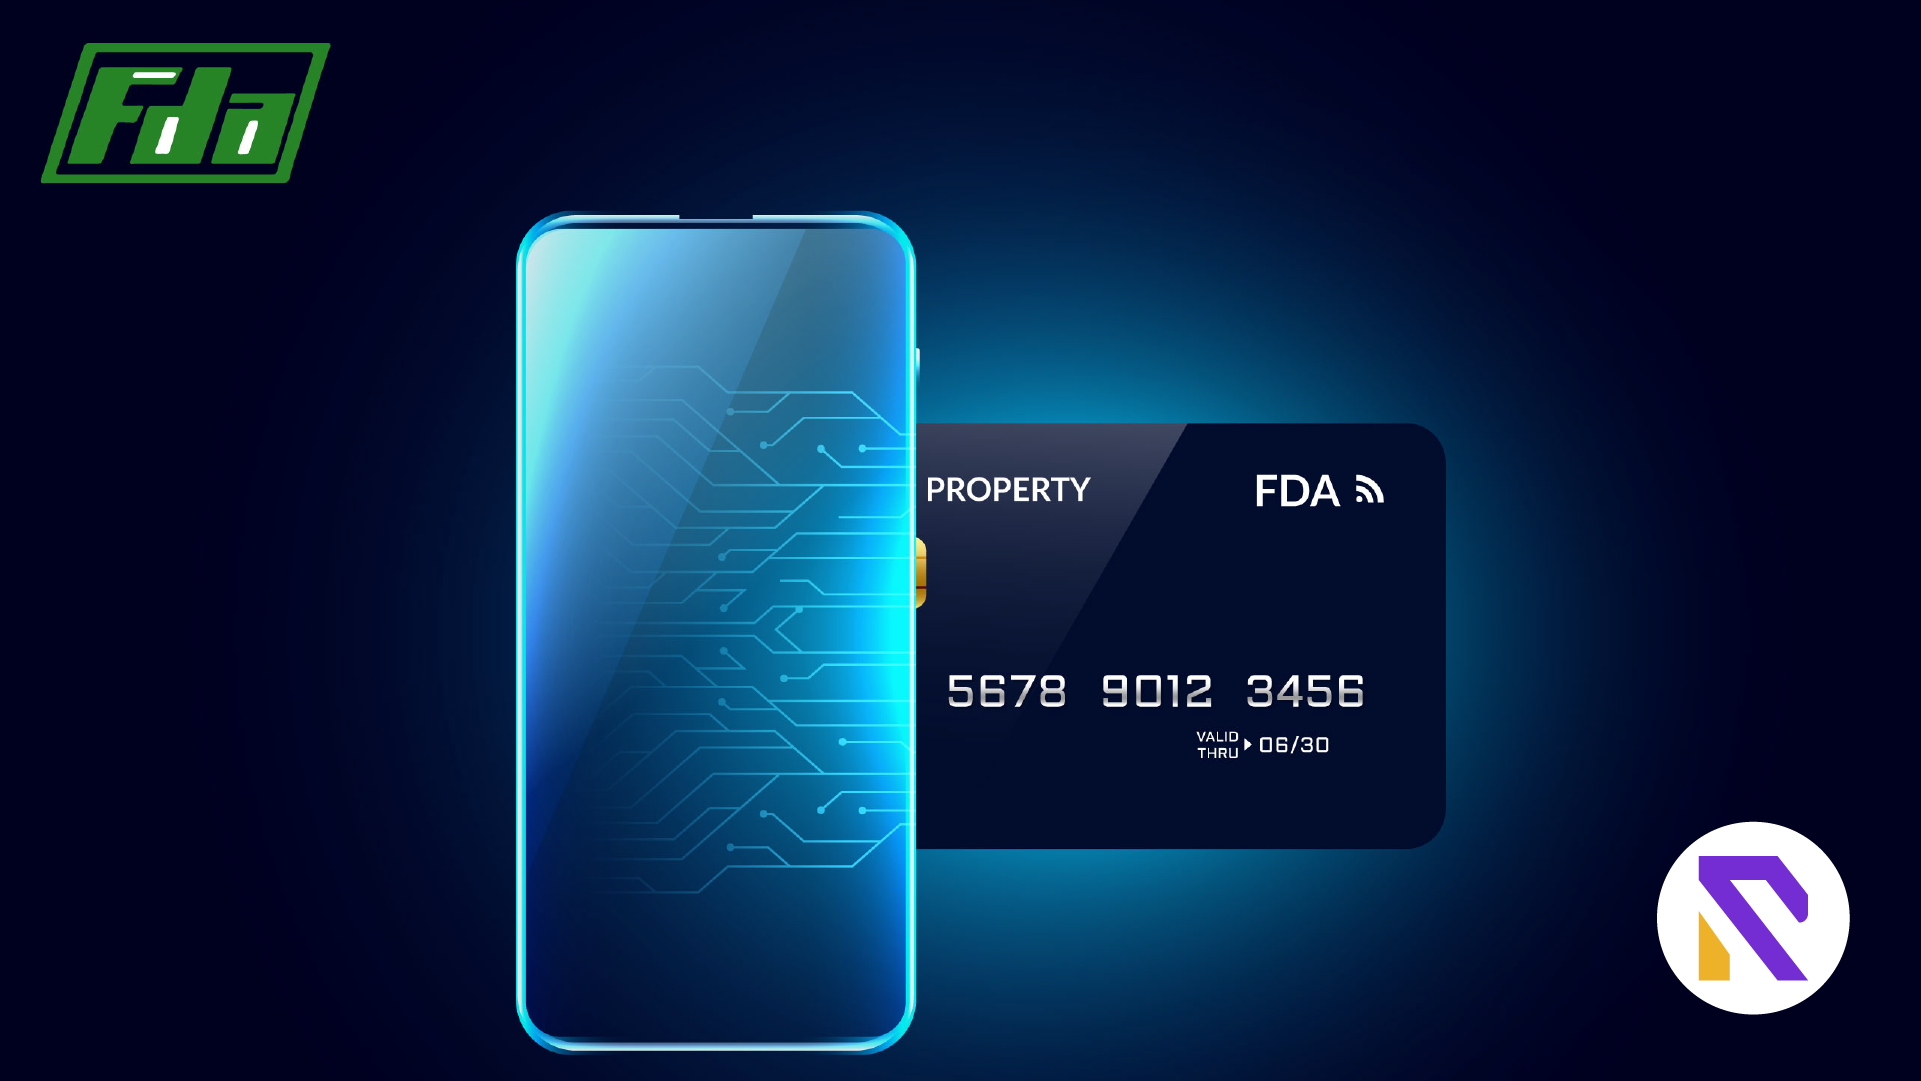 FDA to Issue Smart Cards to Property Owners